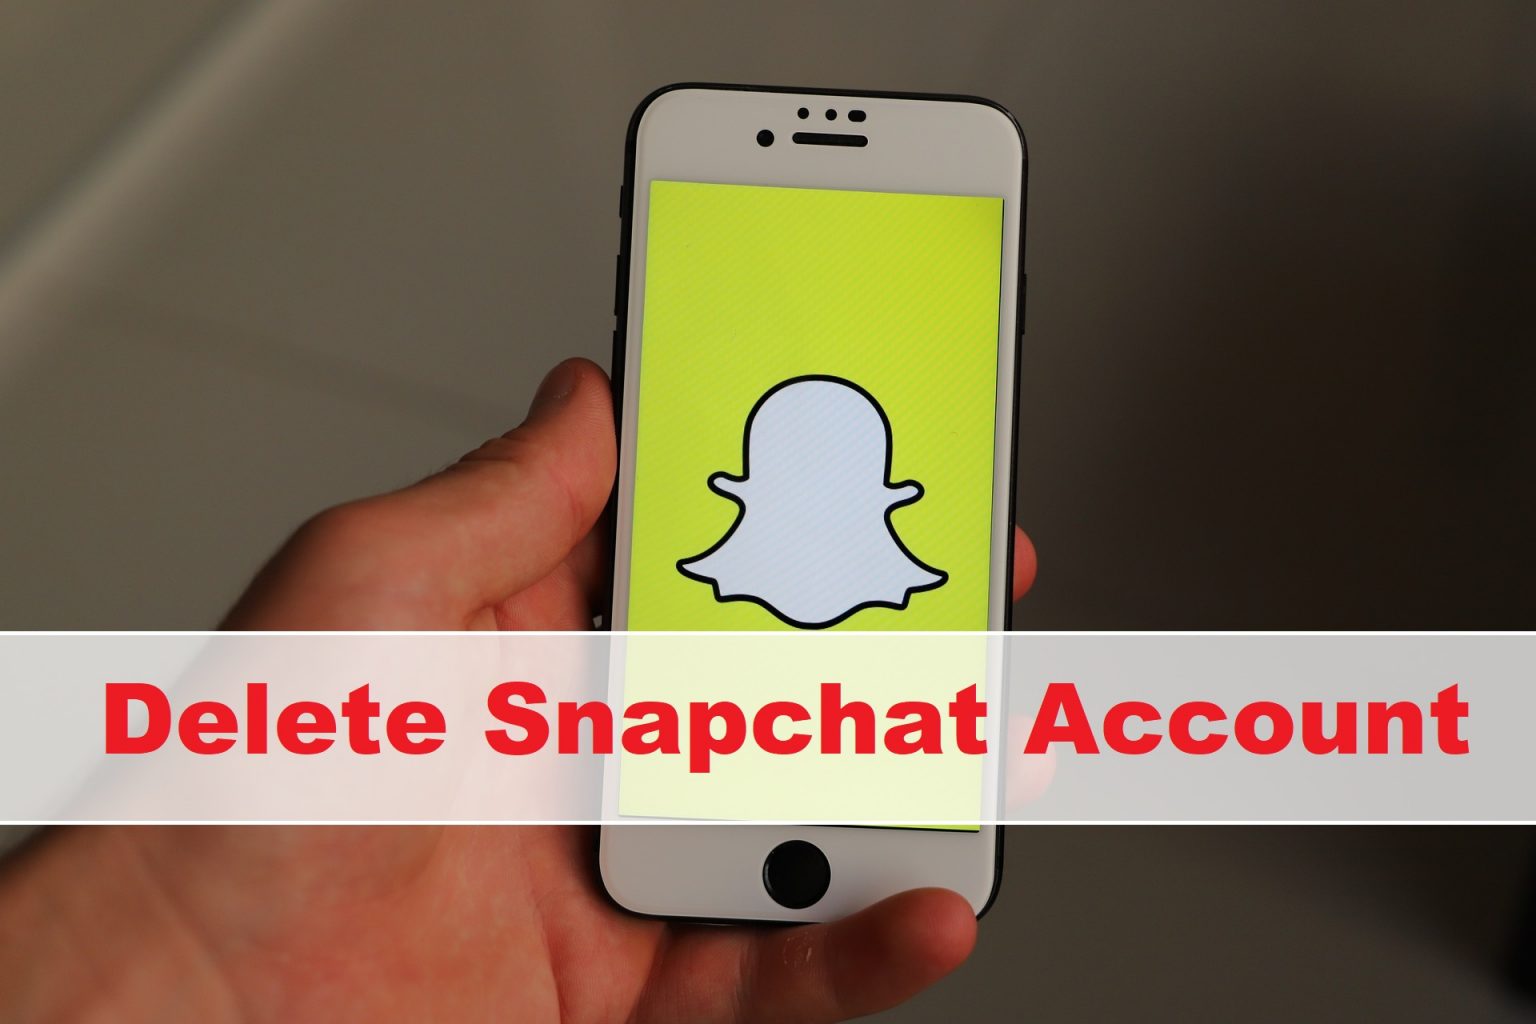 How To Delete Snapchat Account Temporarily And Permanently